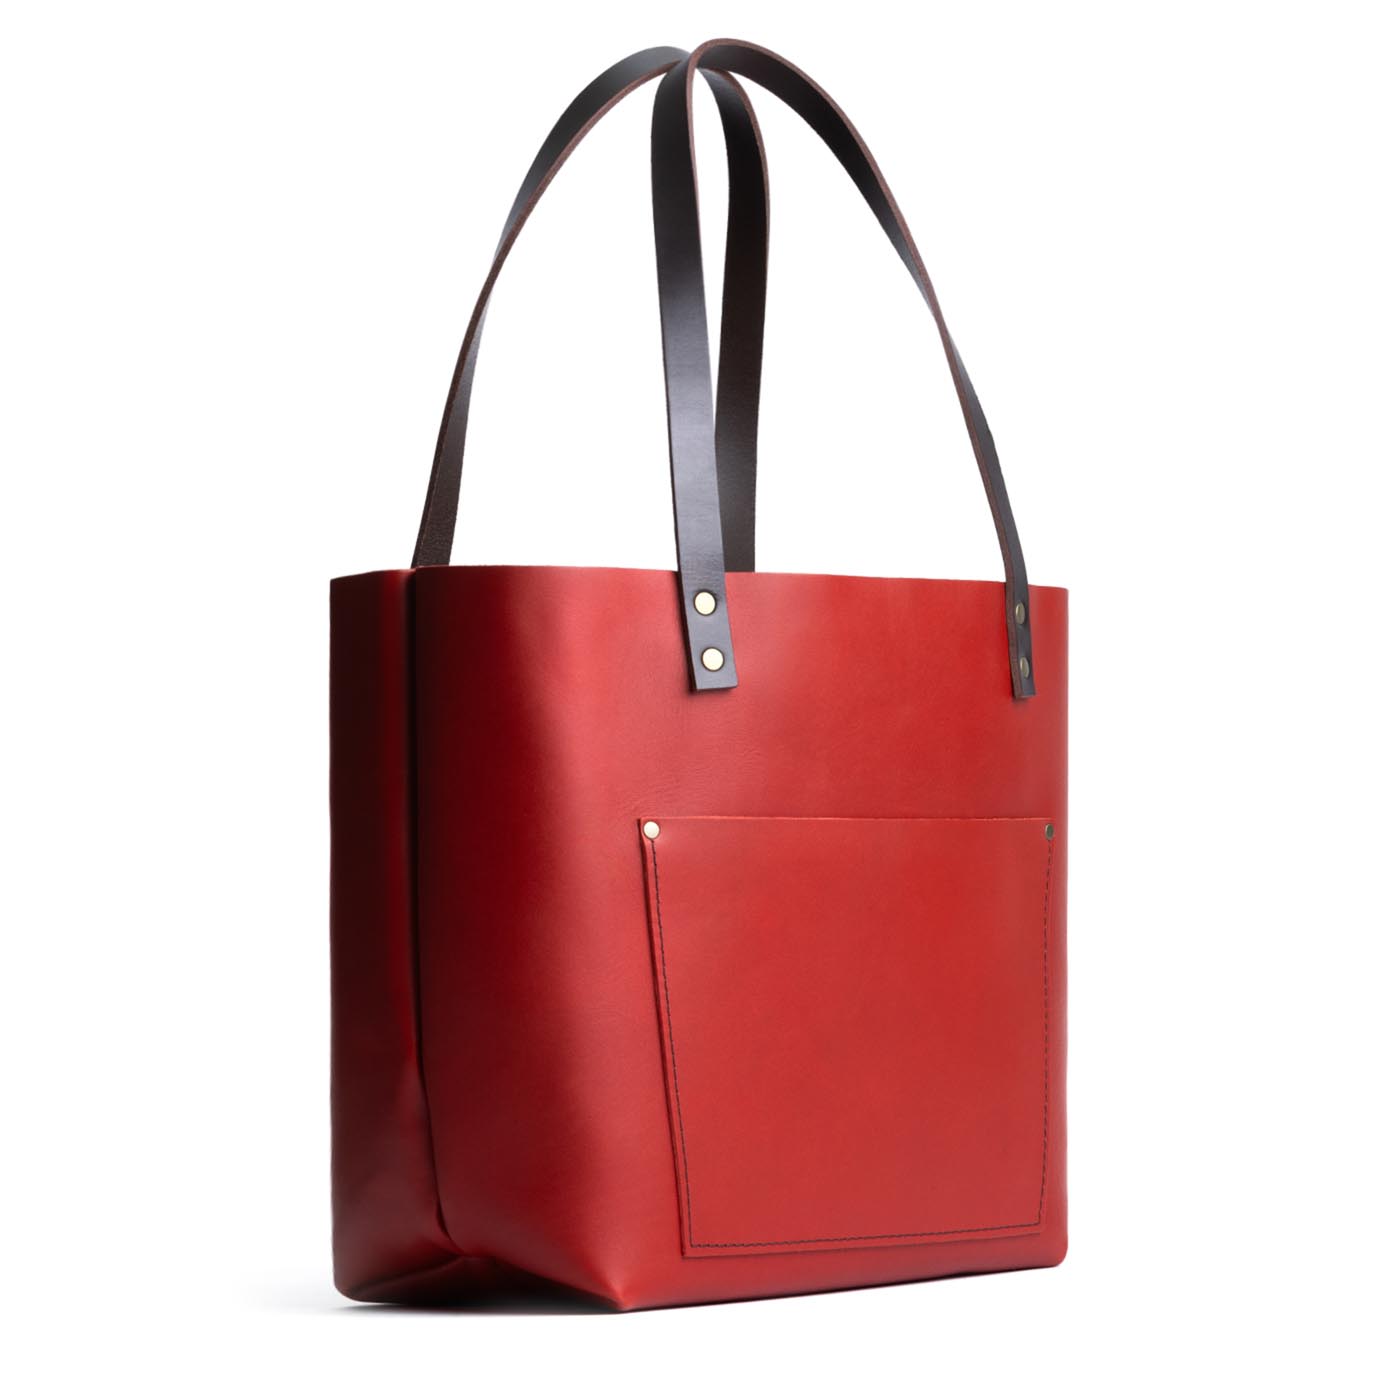 Ruby*Classic | Large leather tote bag with sturdy bridle handles and front pocket